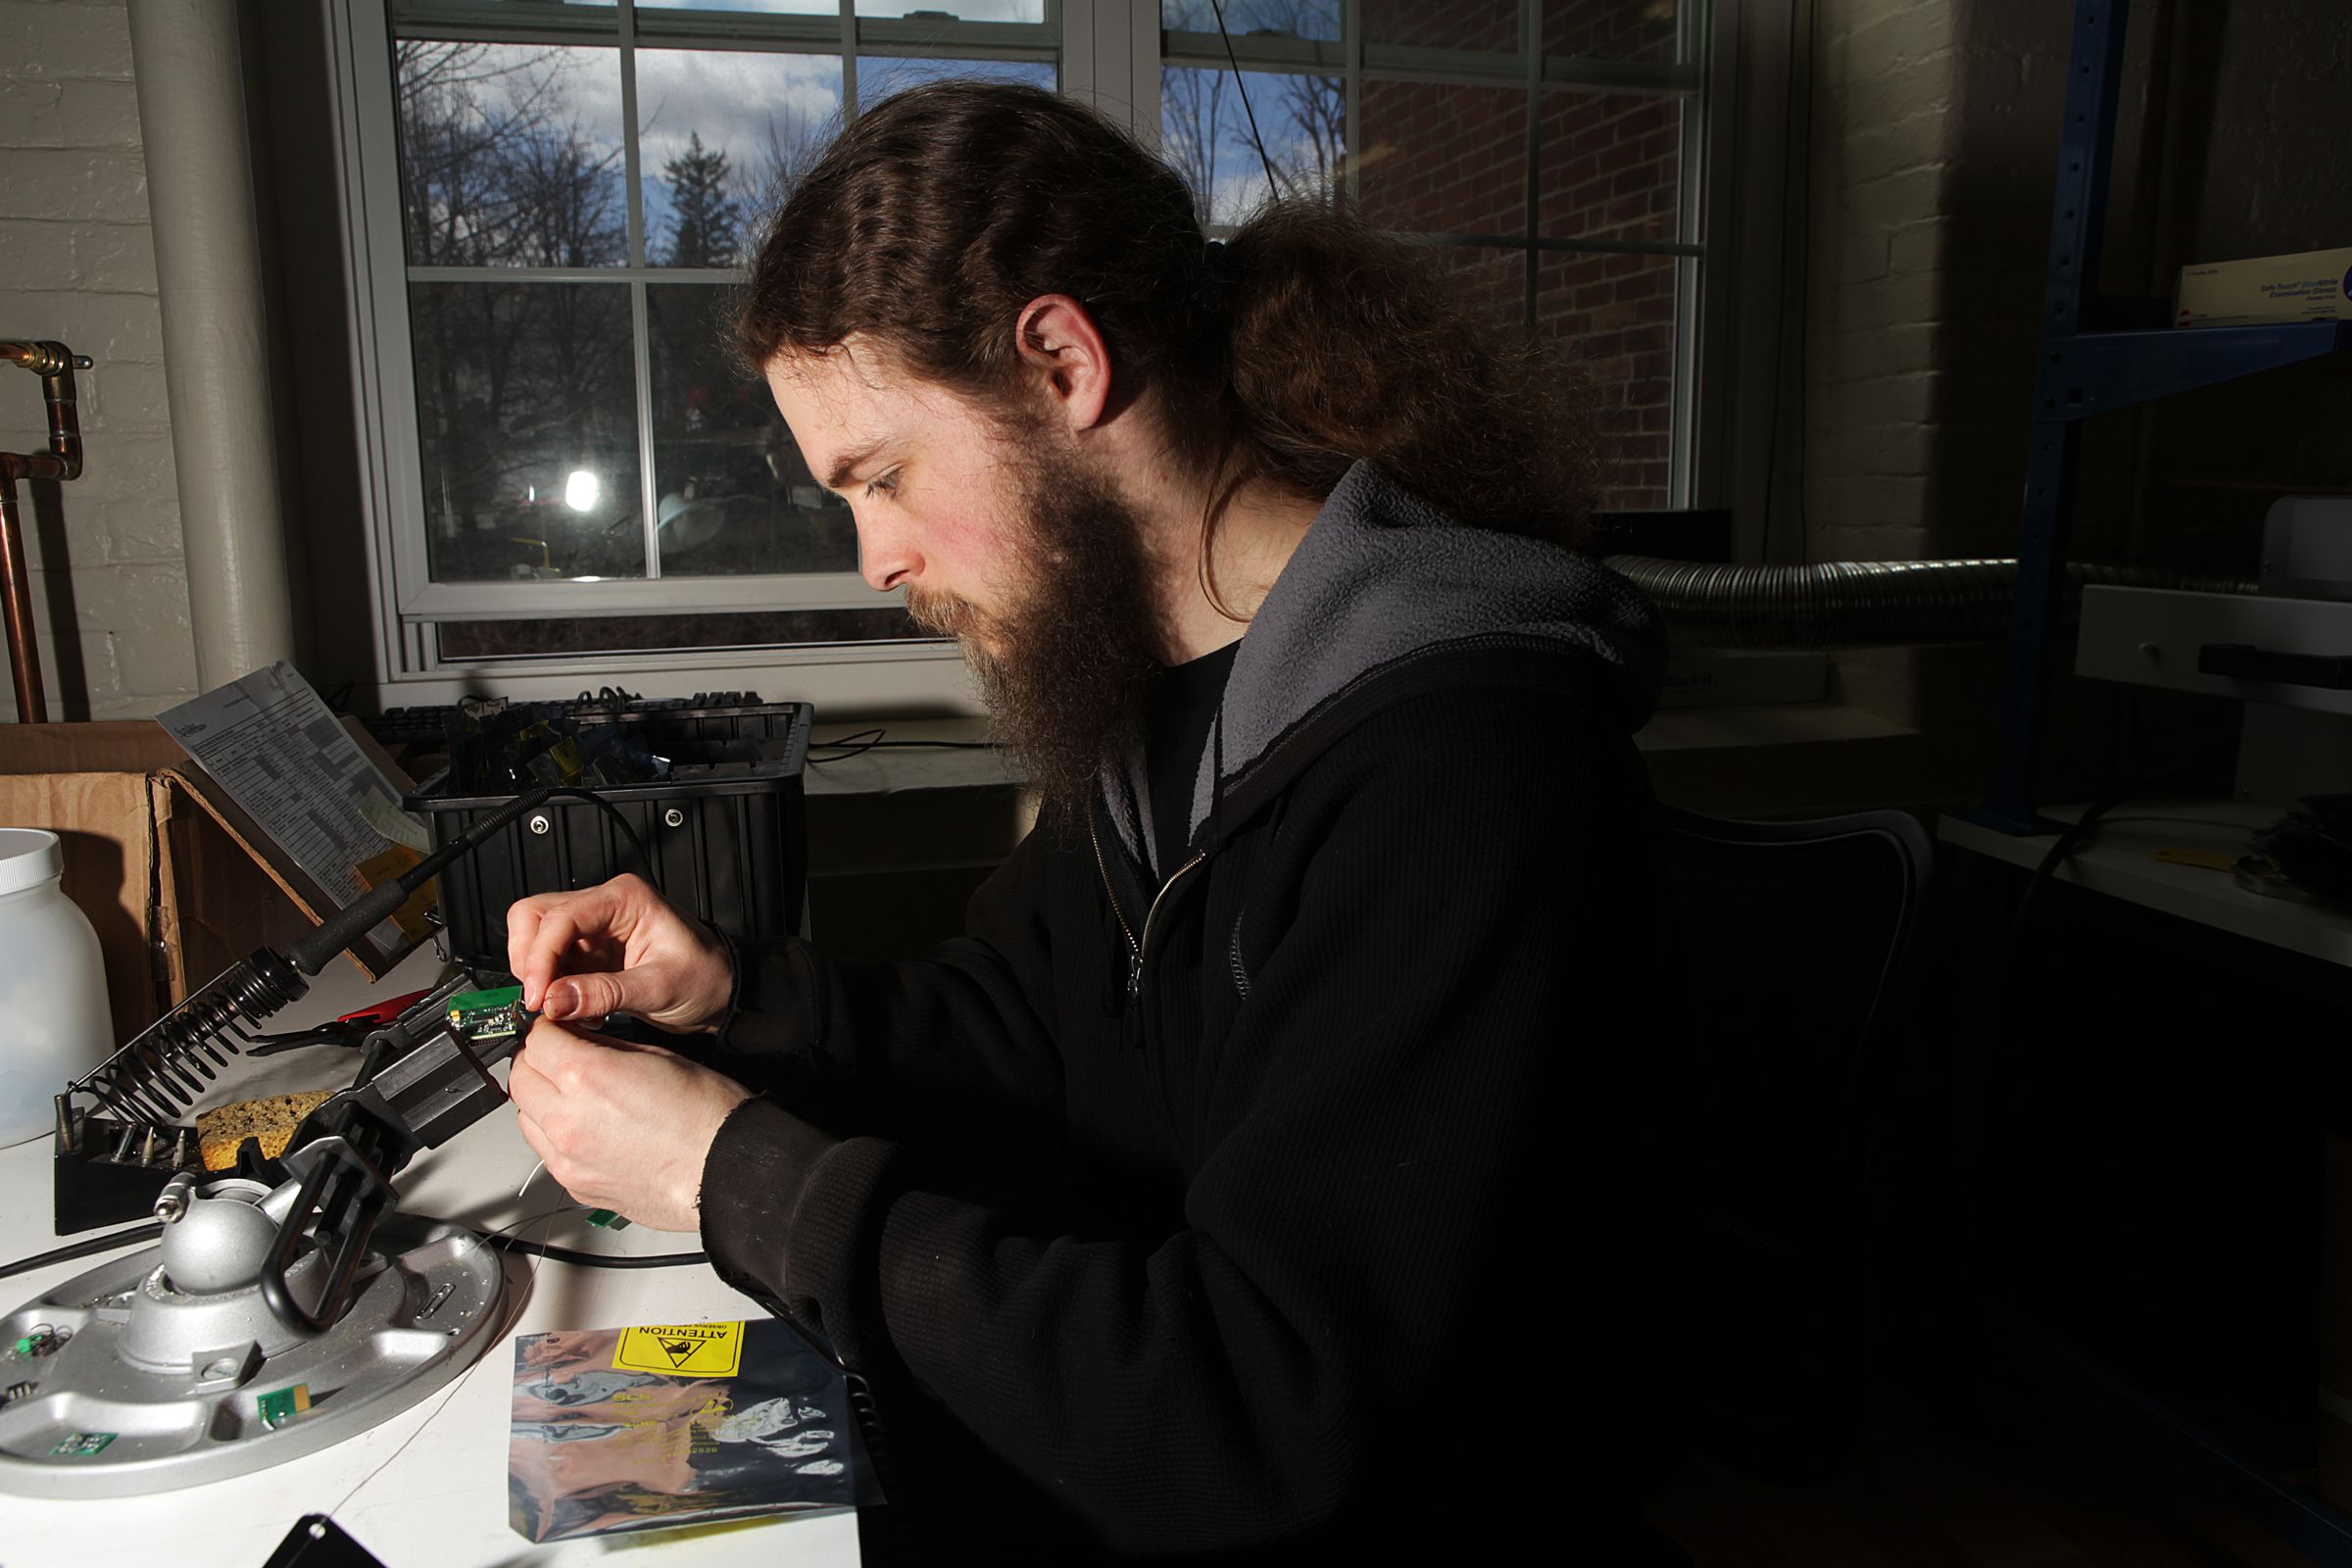 Nick Conquest, an electrical engineer and technician at Simbex, tests old prototypes of the company's head impact technology measuring system on Thursday, April 13, 2017, in Lebanon, N.H. (Valley News - Jovelle Tamayo) Copyright Valley News. May not be reprinted or used online without permission. Send requests to permission@vnews.com.